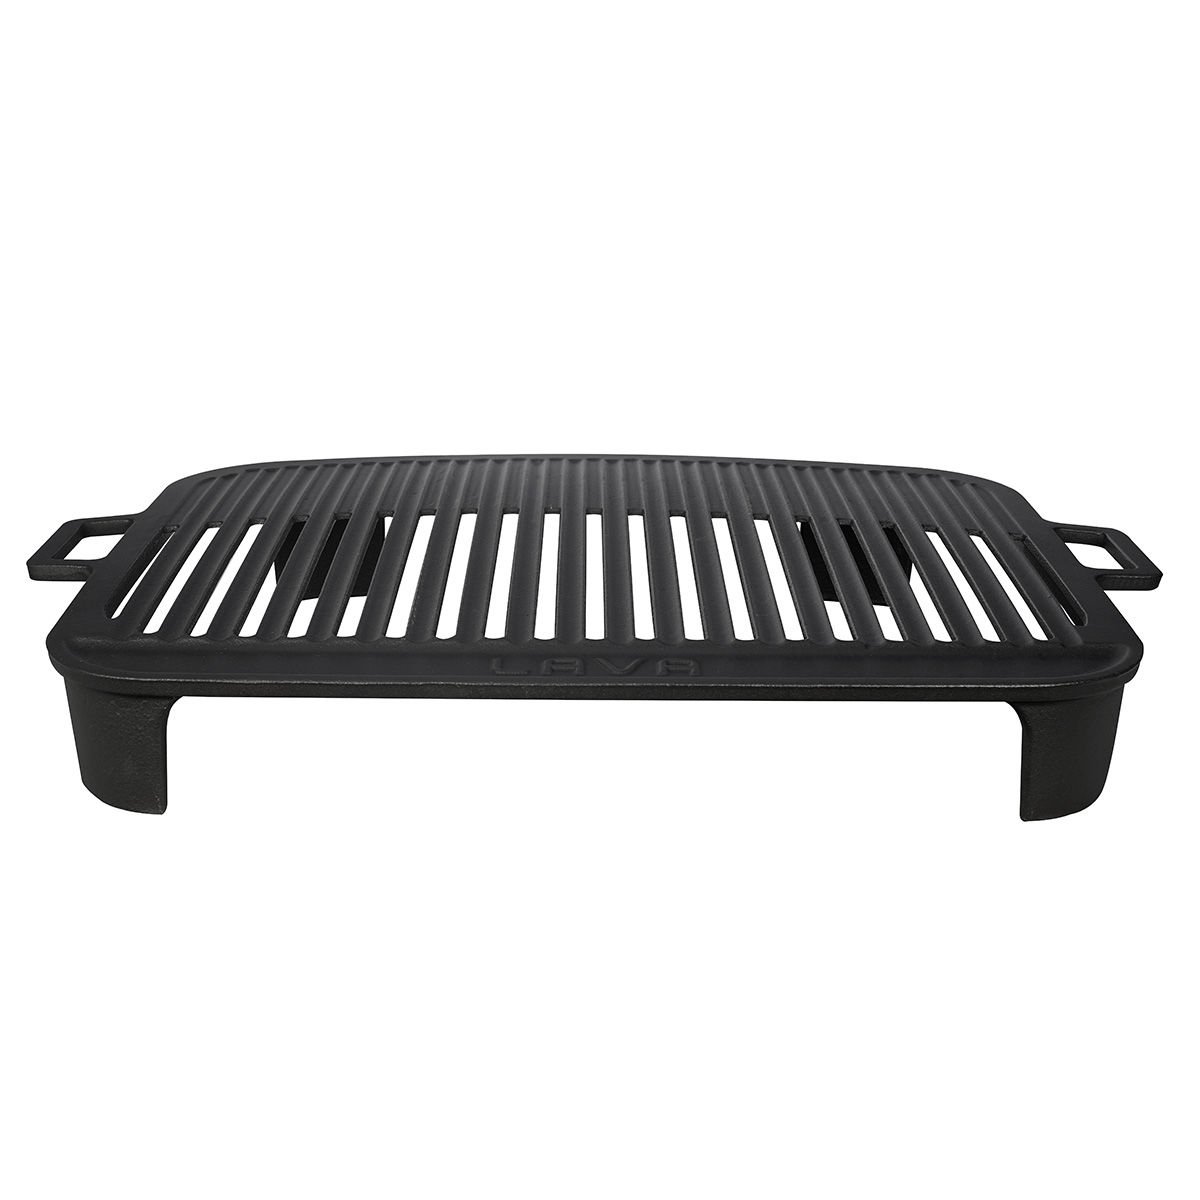 Lava Casting Rectangular Barbecue Grill Size 36x45cm. Cast Iron Solid Double Handle